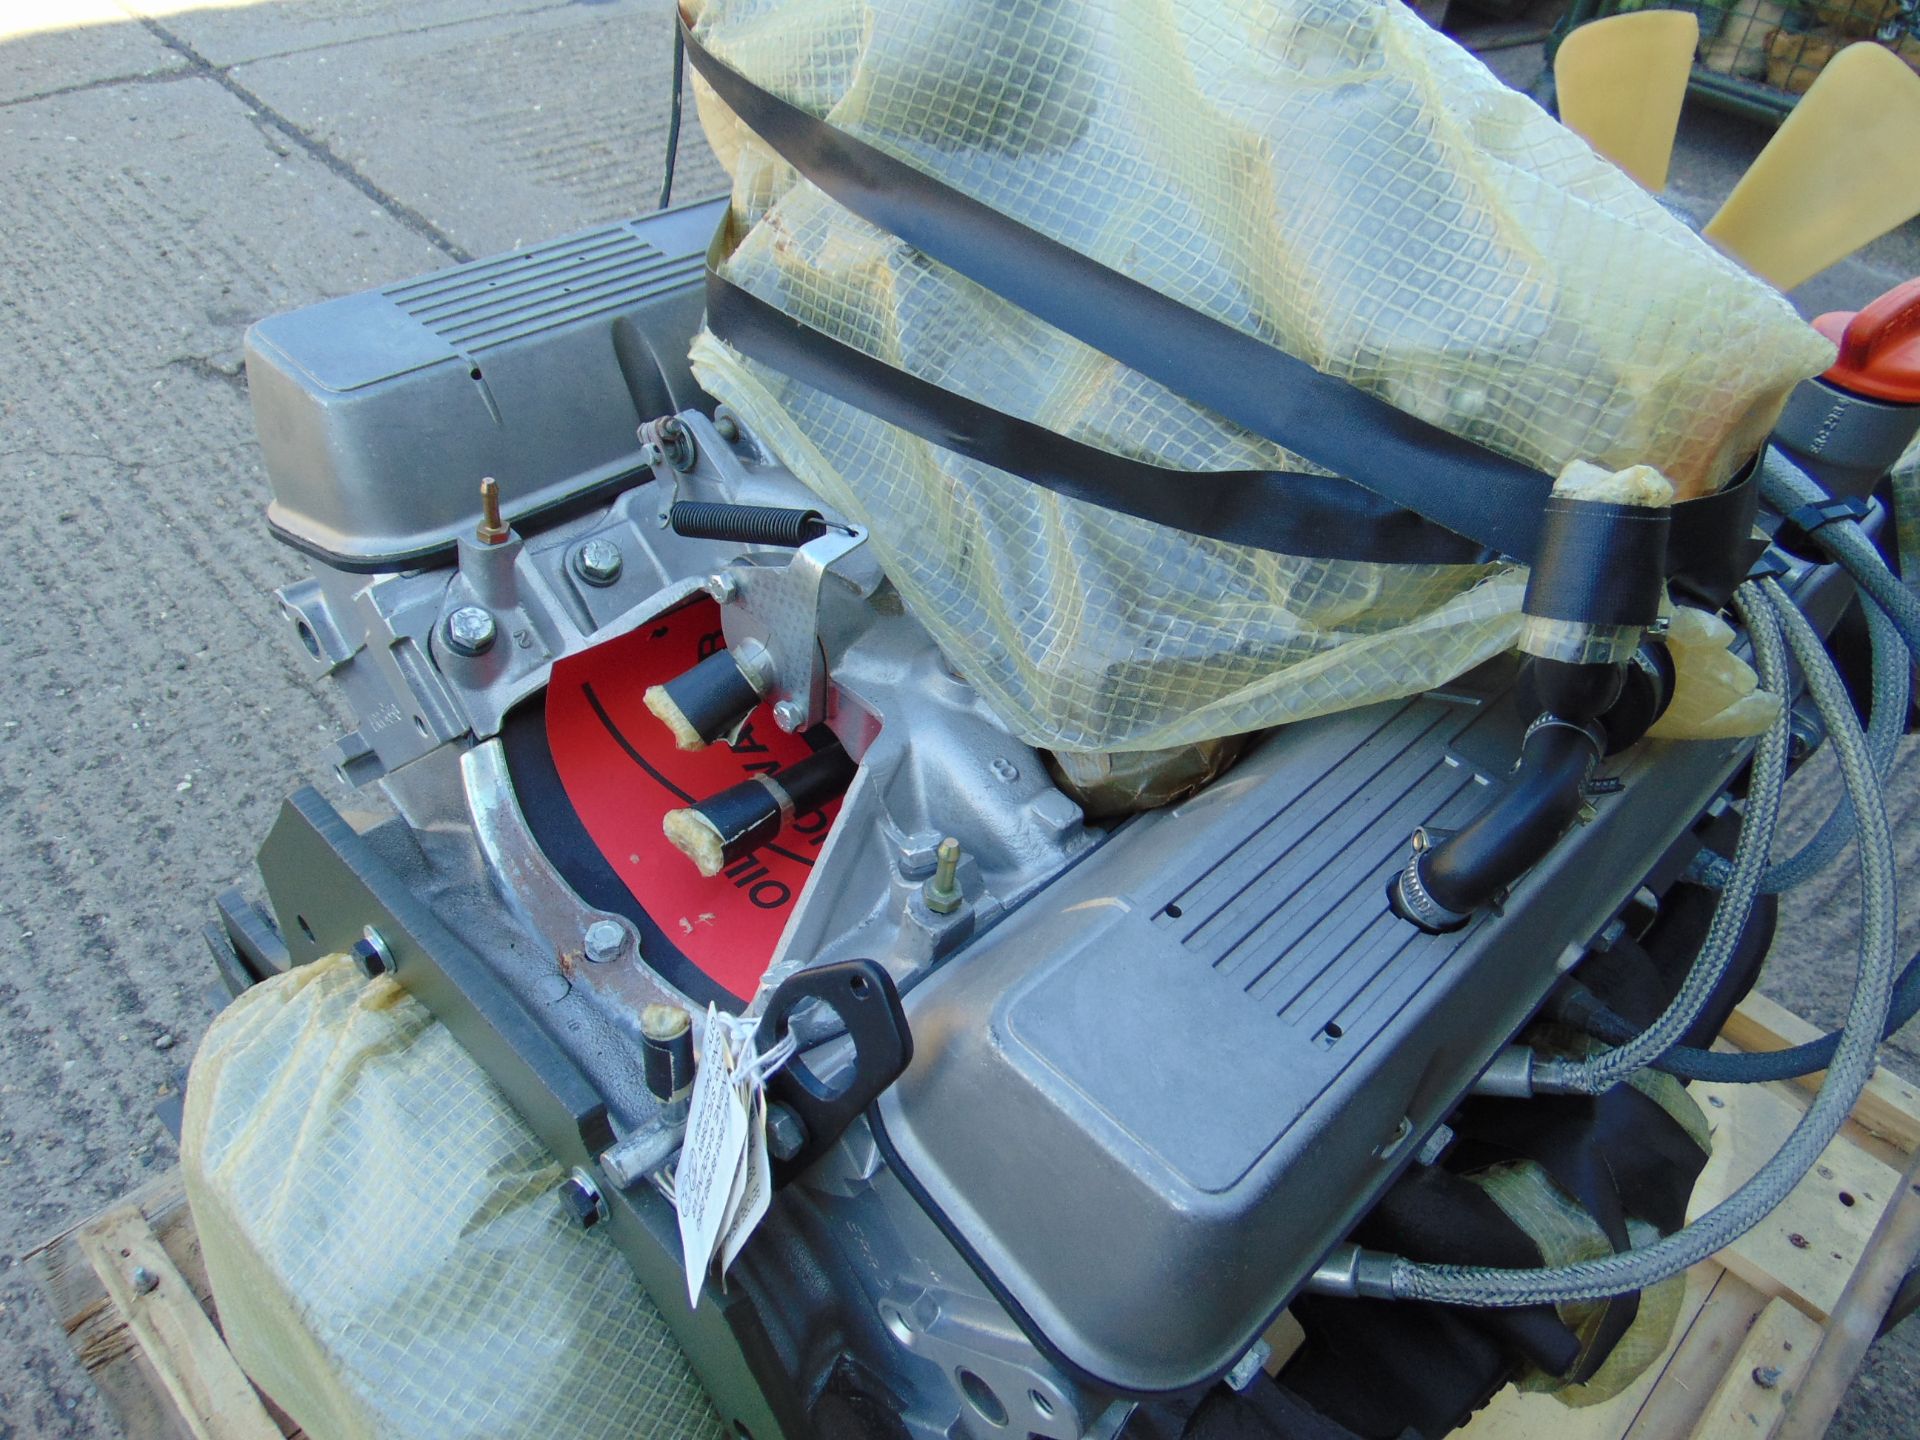 Fully Reconditioned Land Rover V8 Engine c/w all Accessories, as shown in Crate etc - Image 14 of 21